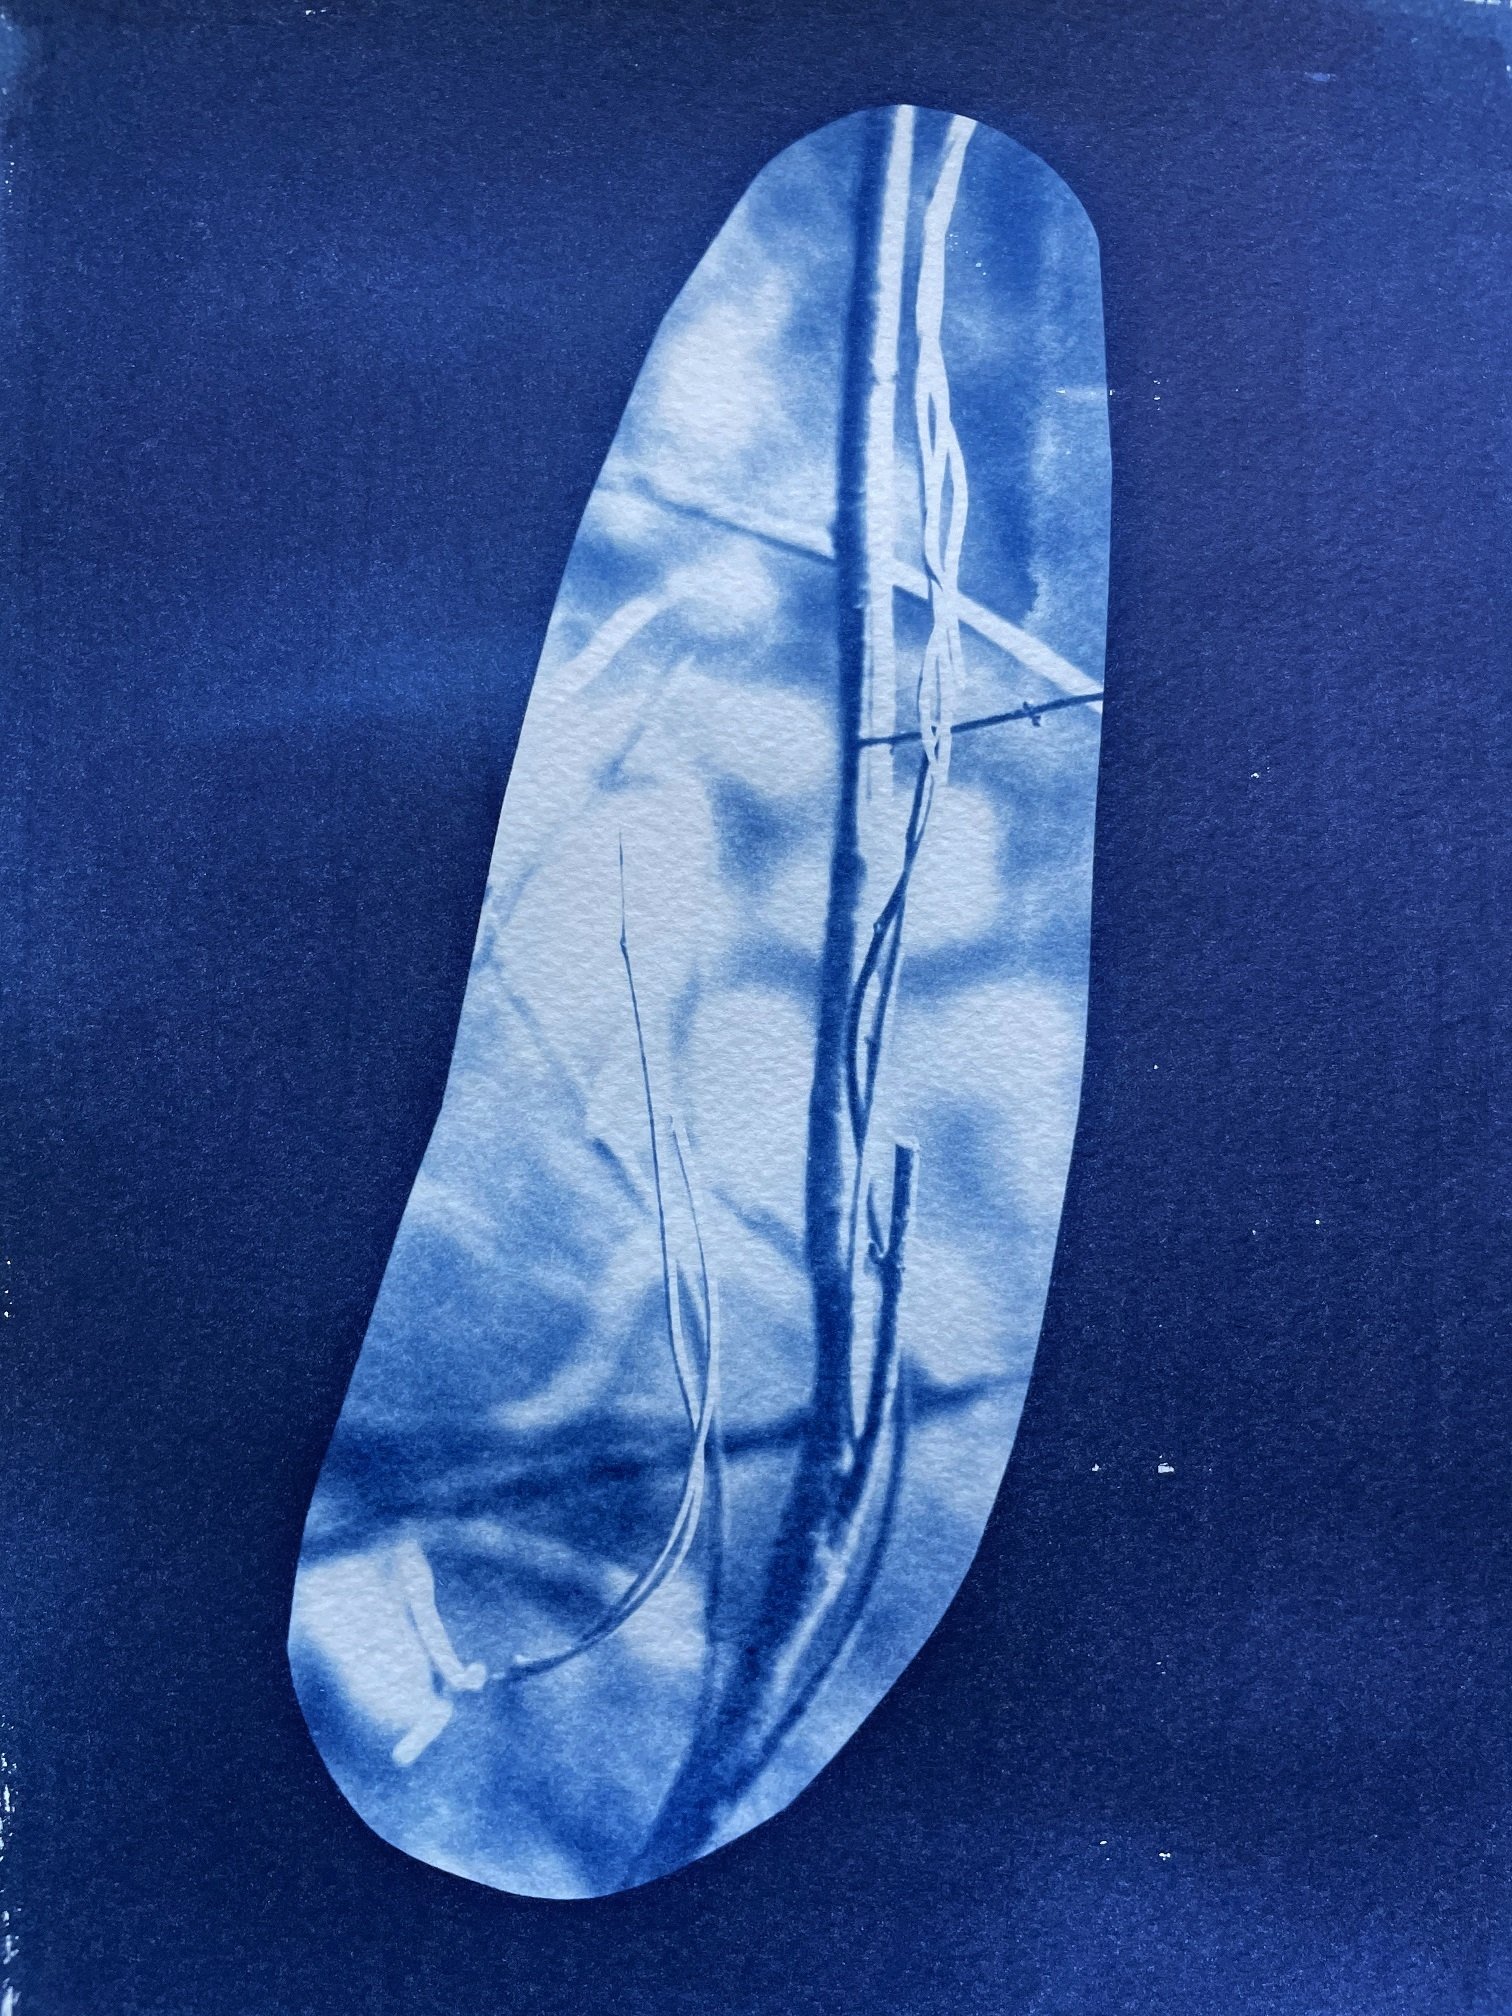 Aslı Narin, “Signals and Exchanges 8,' 2021, cyanotype printing on watercolor paper, 22 by 9 by 30 centimeters. 